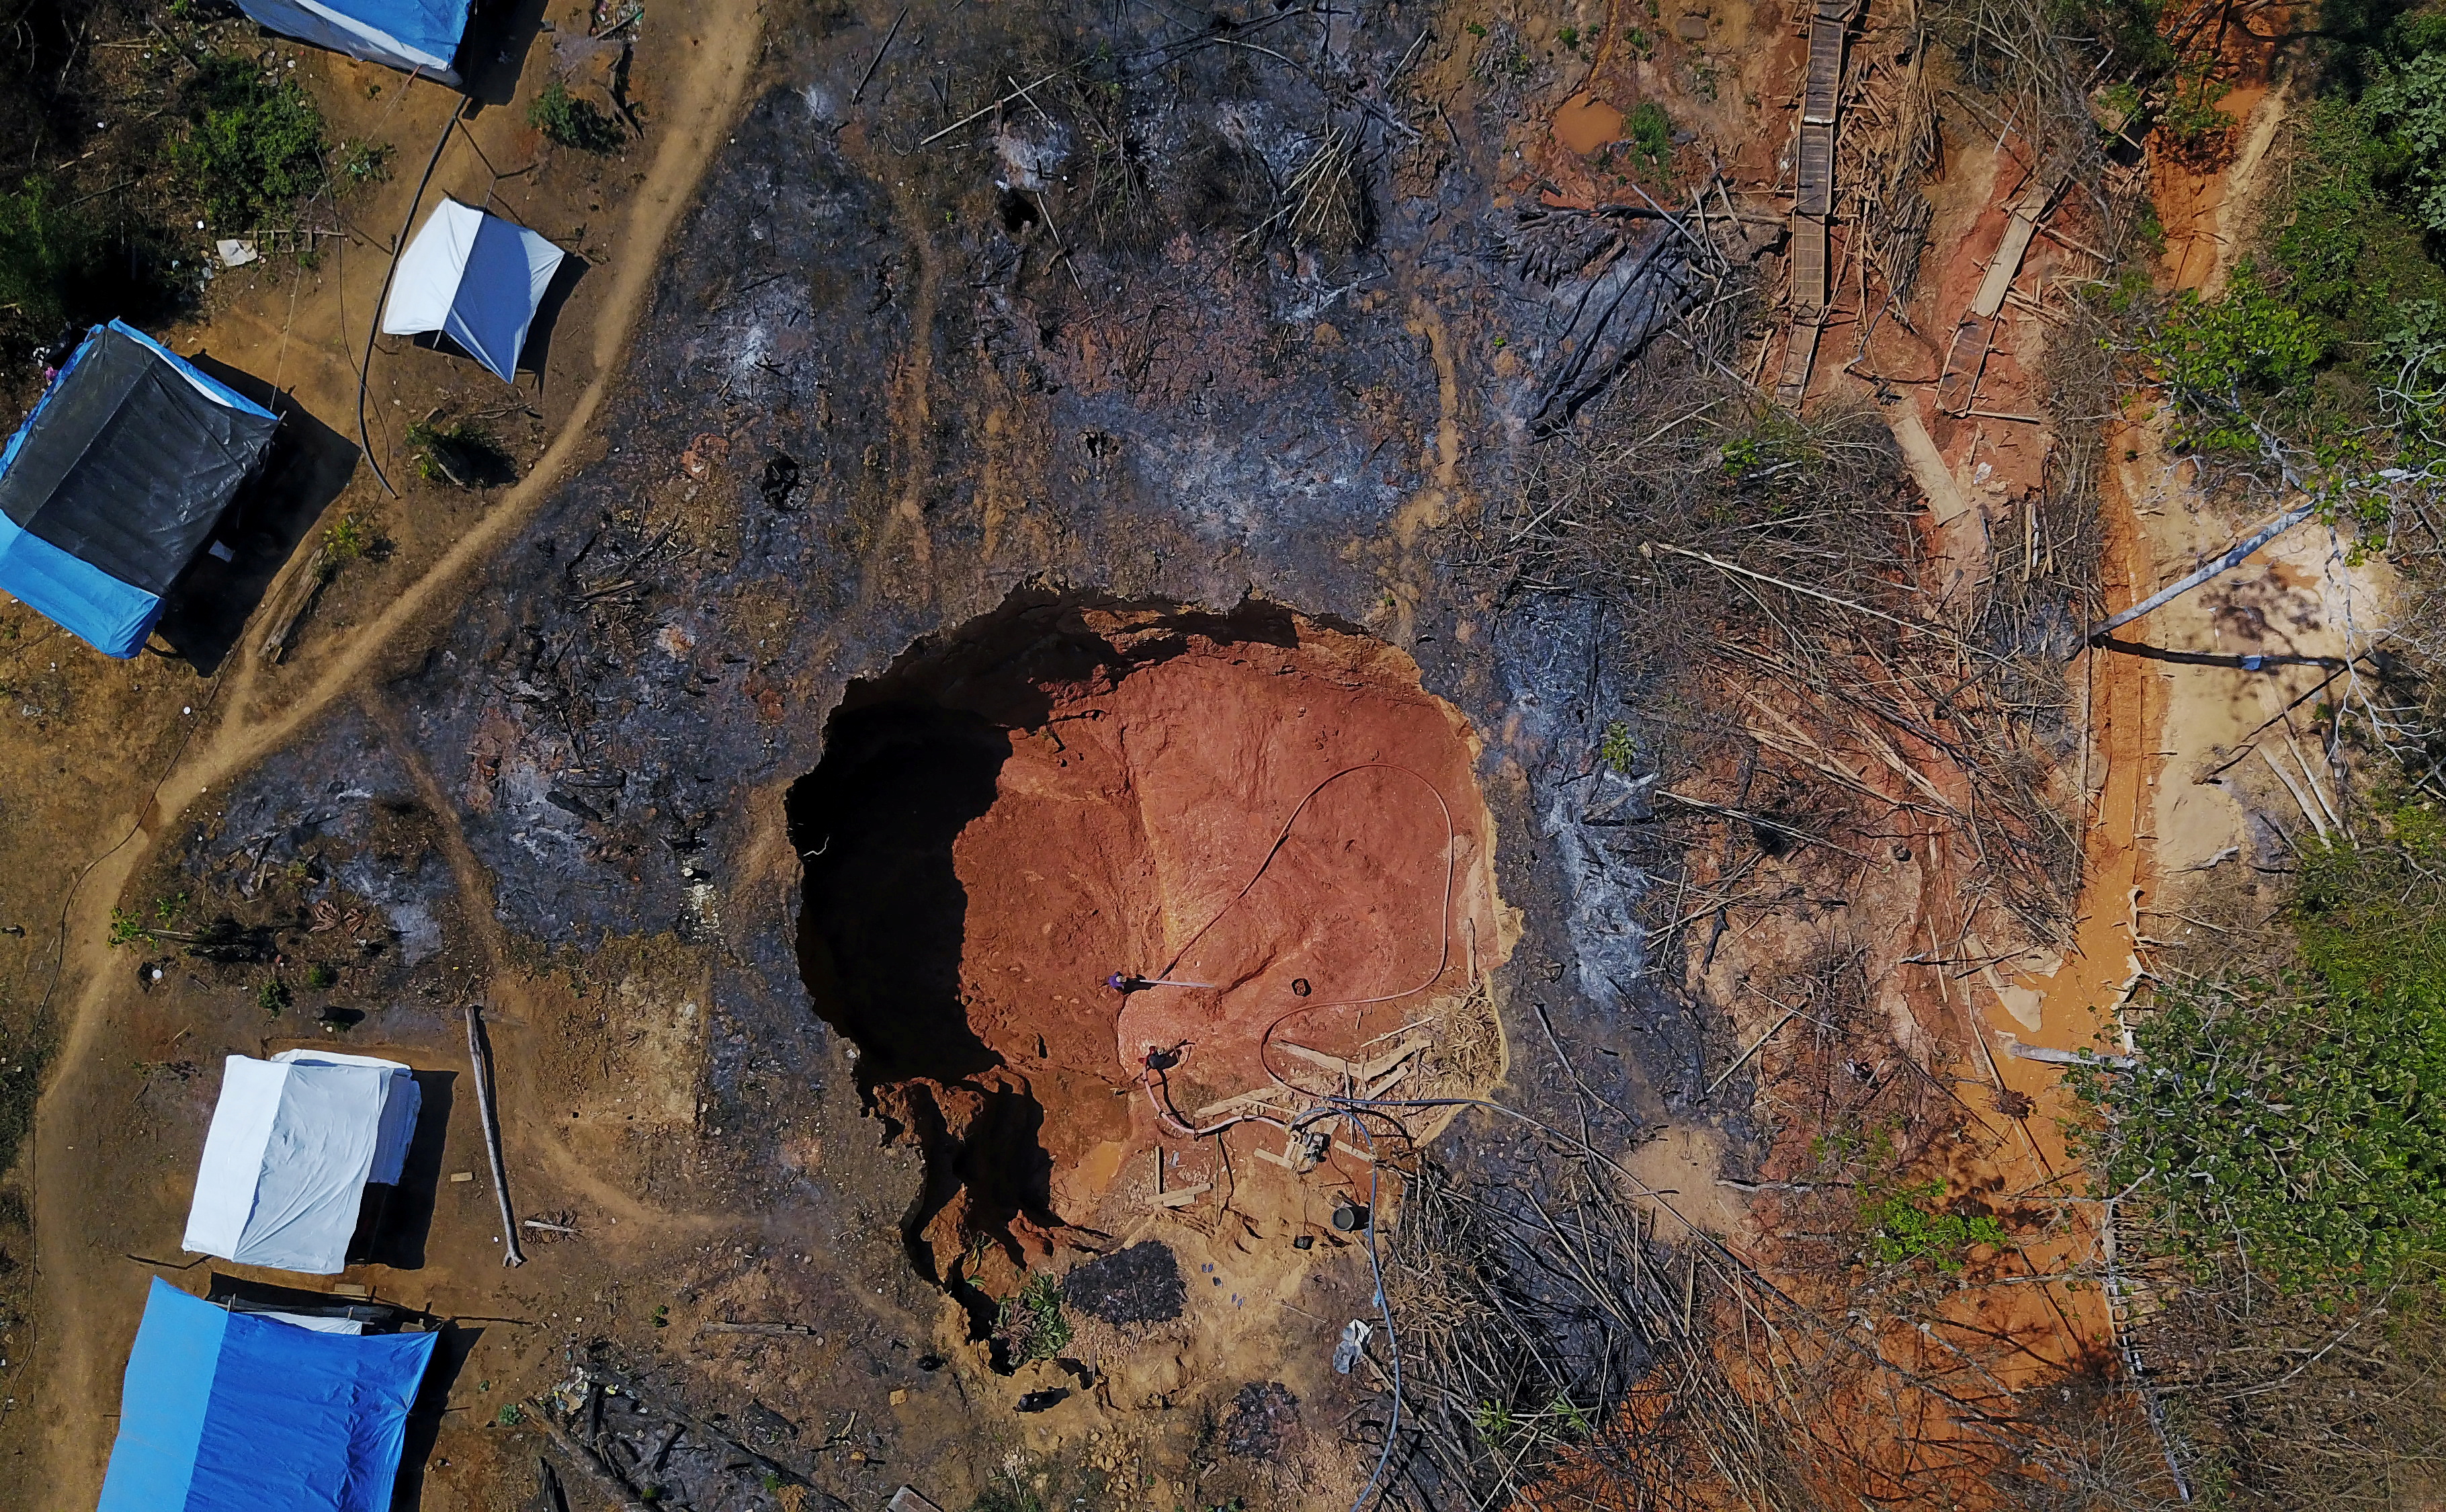 Aerial view shows a wildcat gold miner, or garimpeiro, as he uses high-pressure jets of water to dislodge rock material at a wildcat mine, also known as garimpo, at a deforested area of Amazon rainforest near Crepurizao